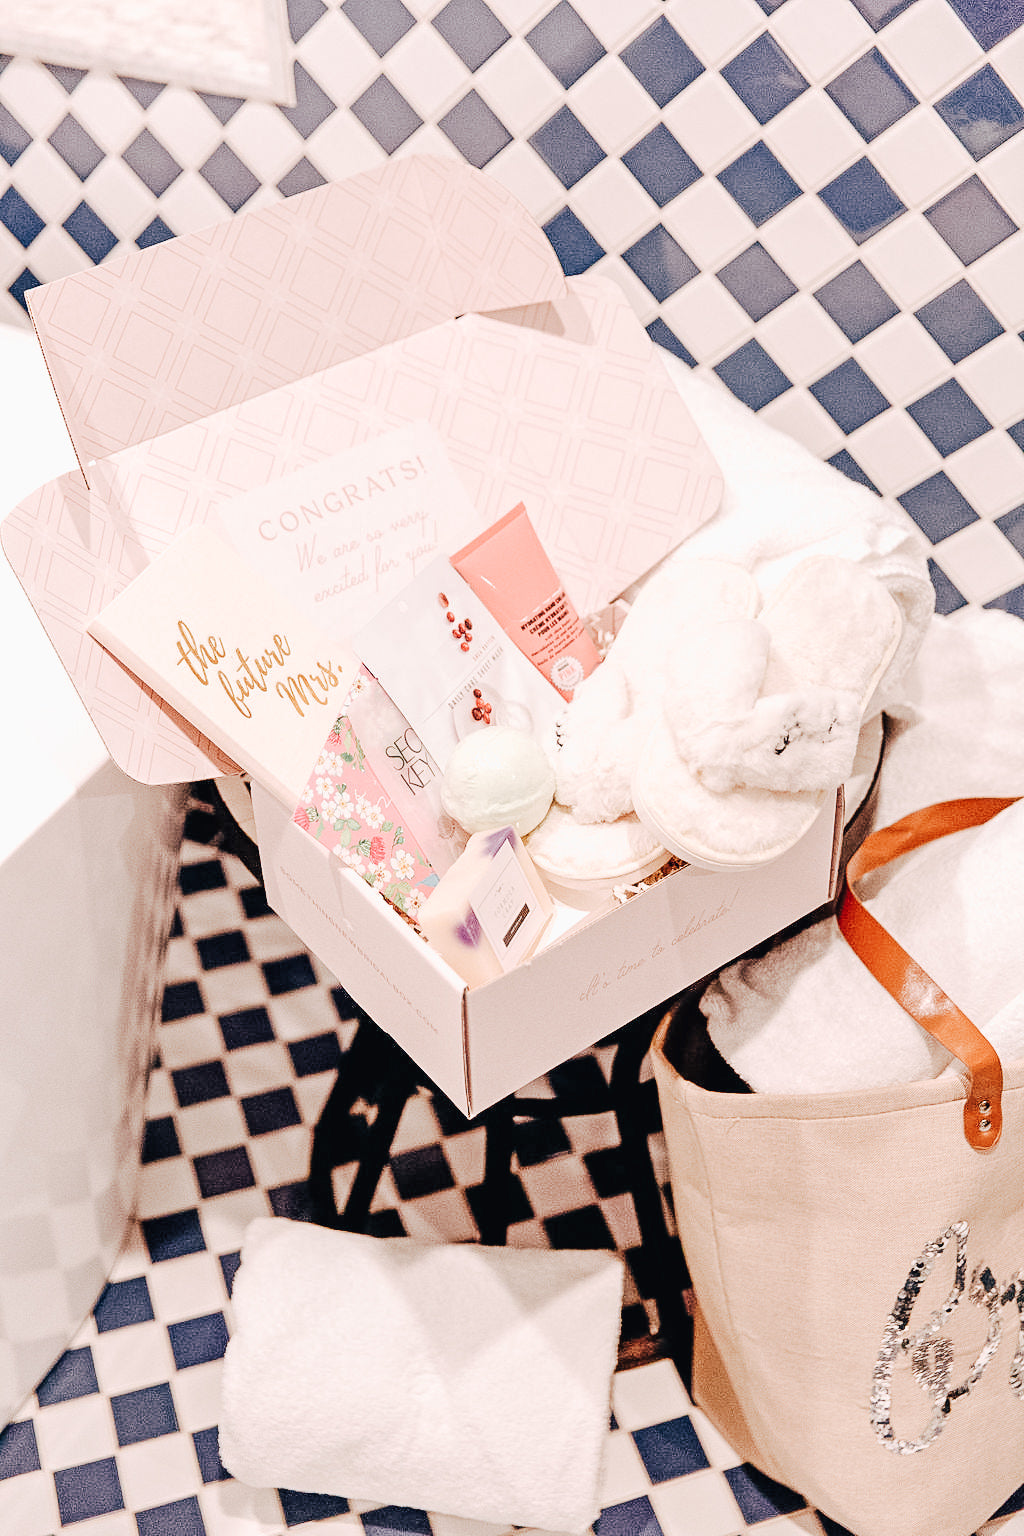 The Pampered Bride Box